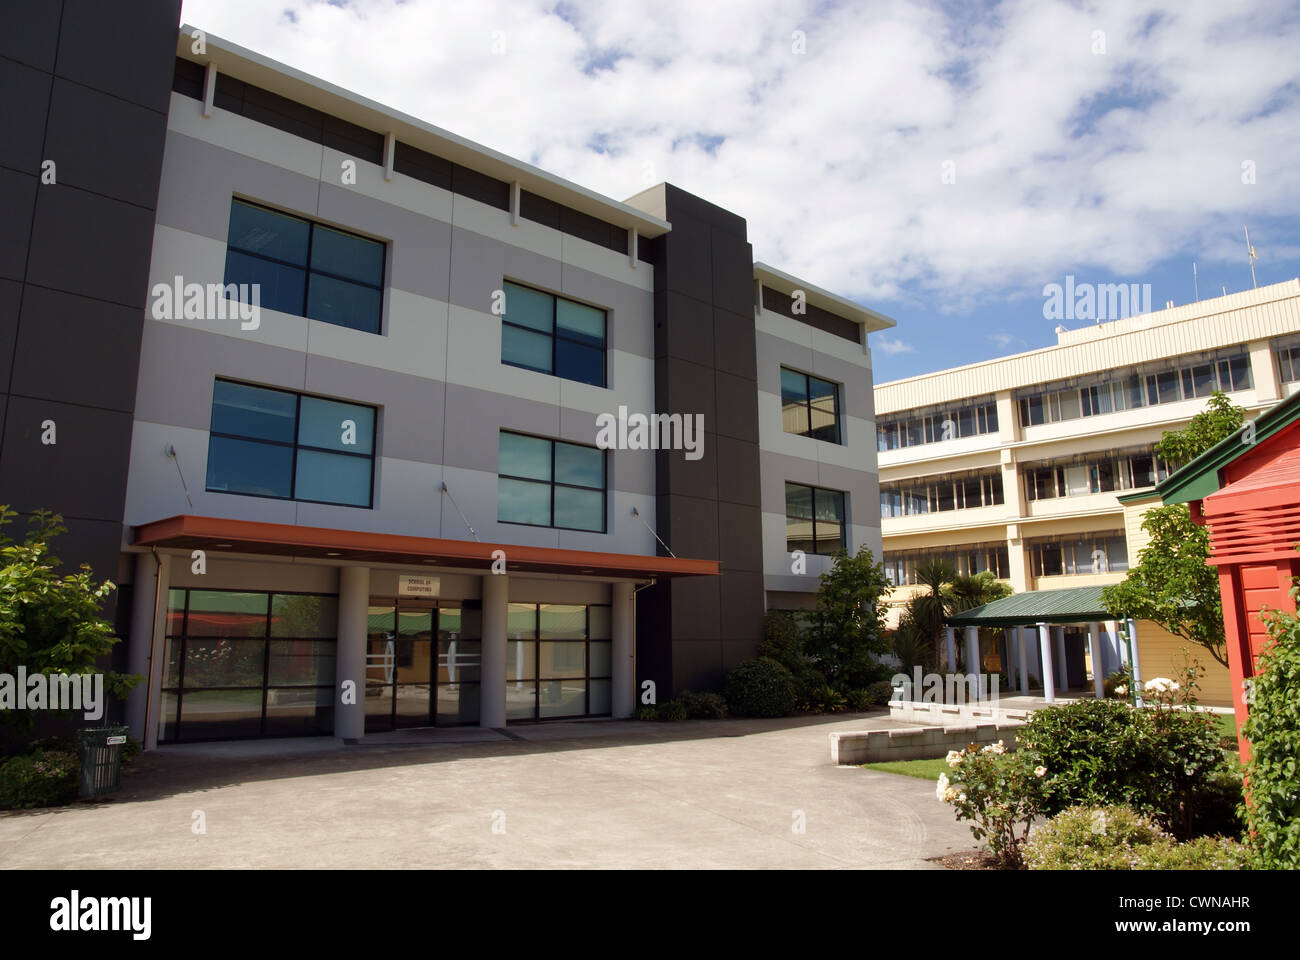 Eastern Institute of Technology (EIT) campus in Hawke's Bay, New Zealand Stock Photo